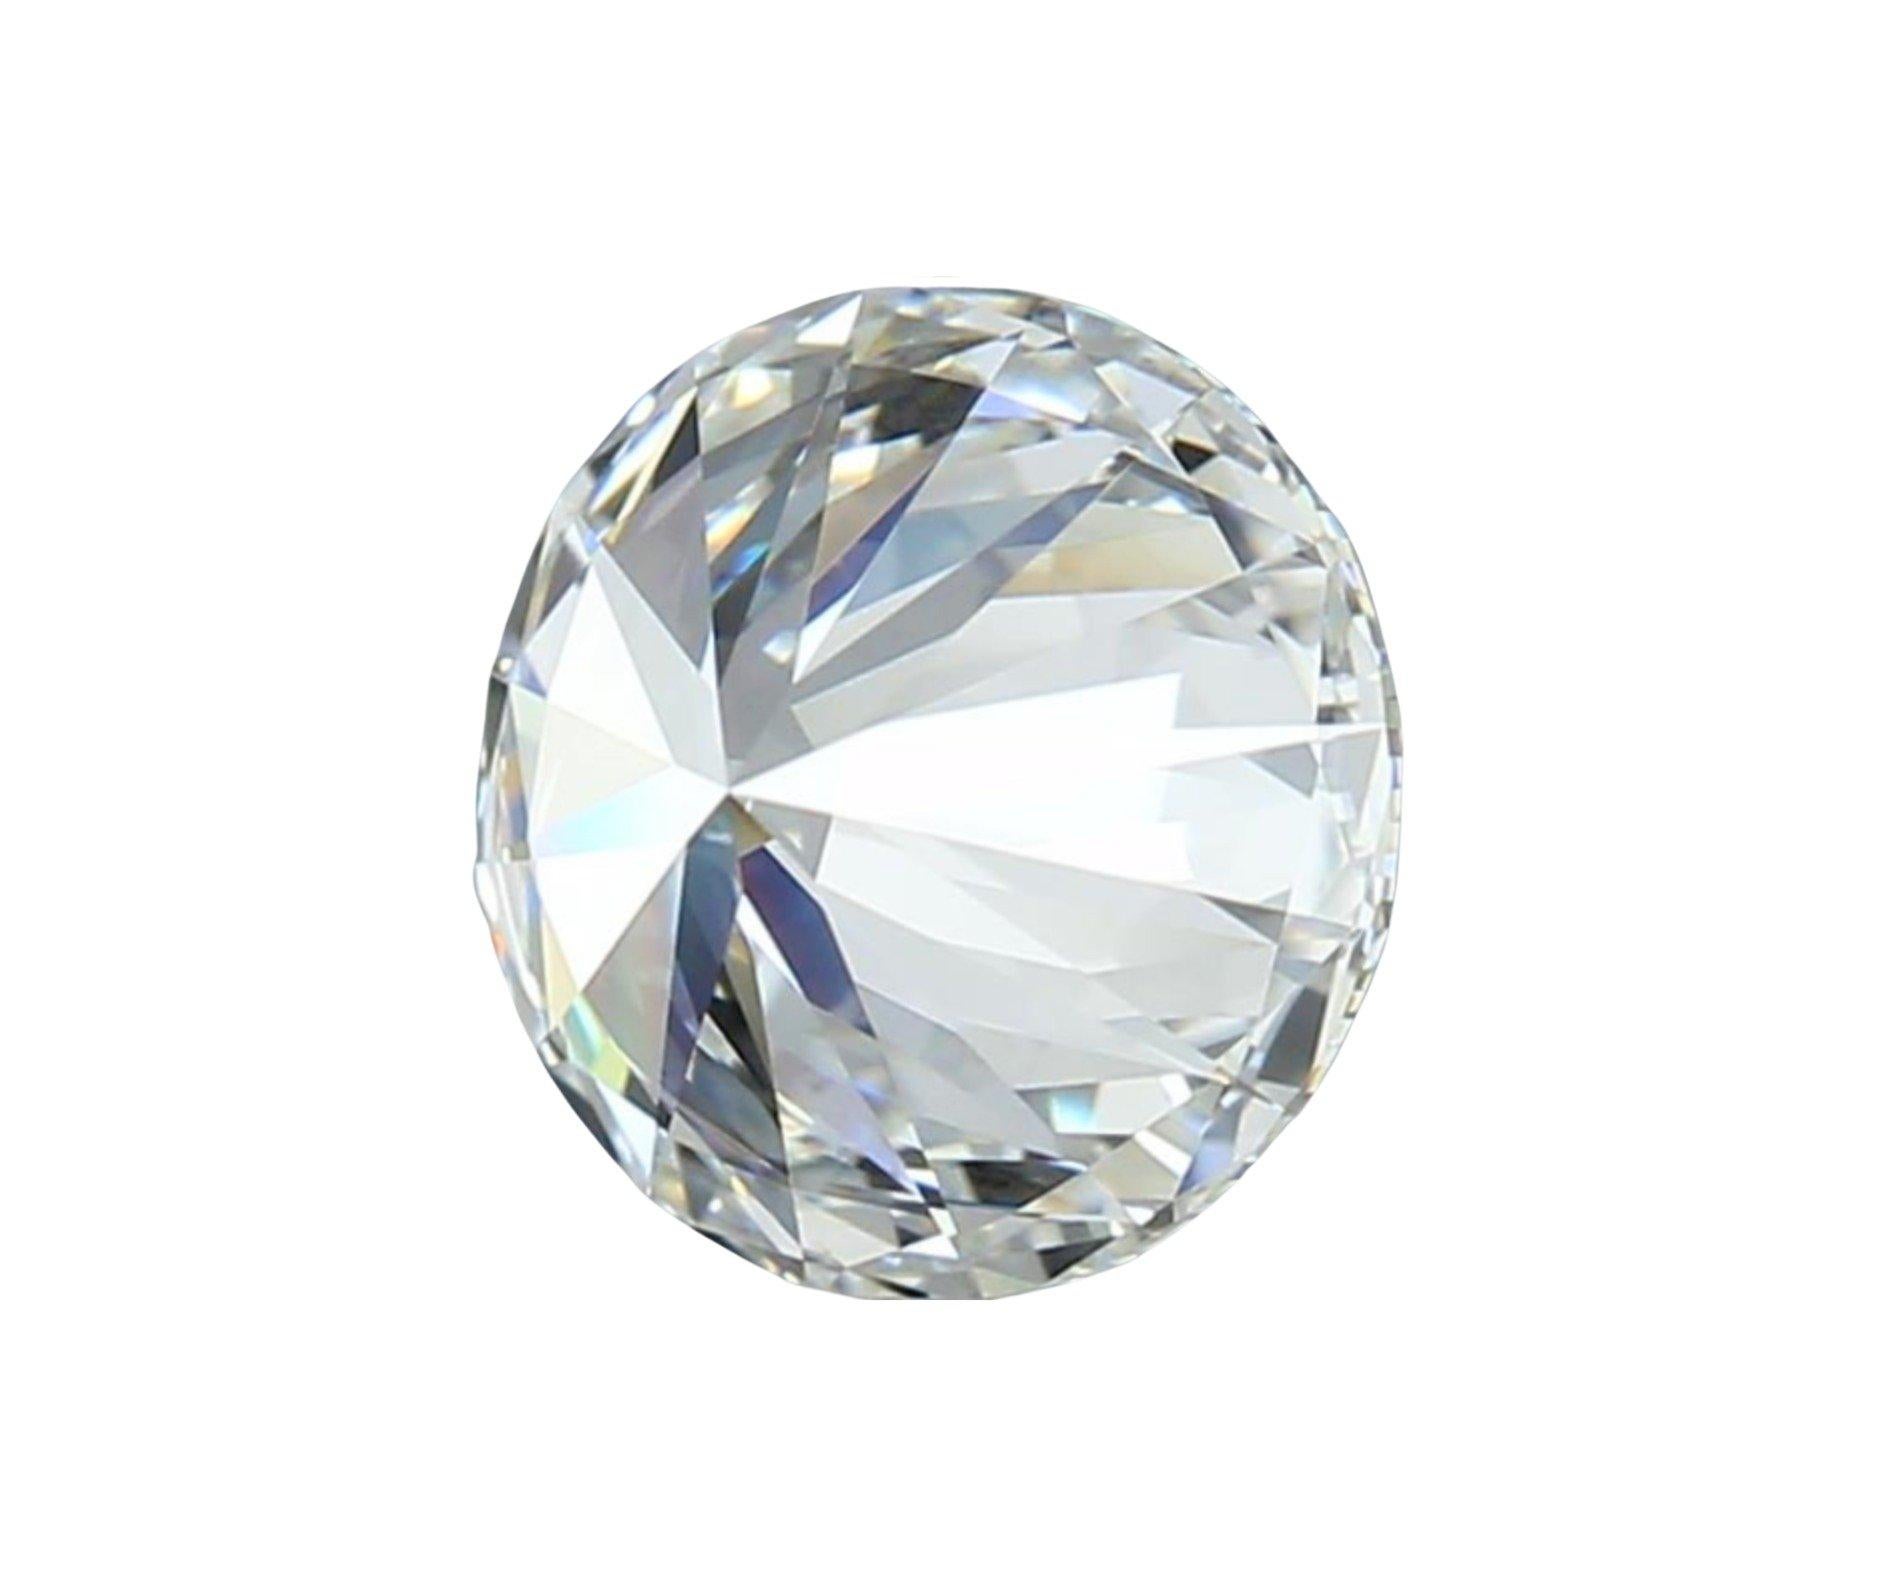 Stunning 2 Pcs Natural Diamonds with 1.85 Ct Round H IF VVS1 GIA Cert. For Sale 2